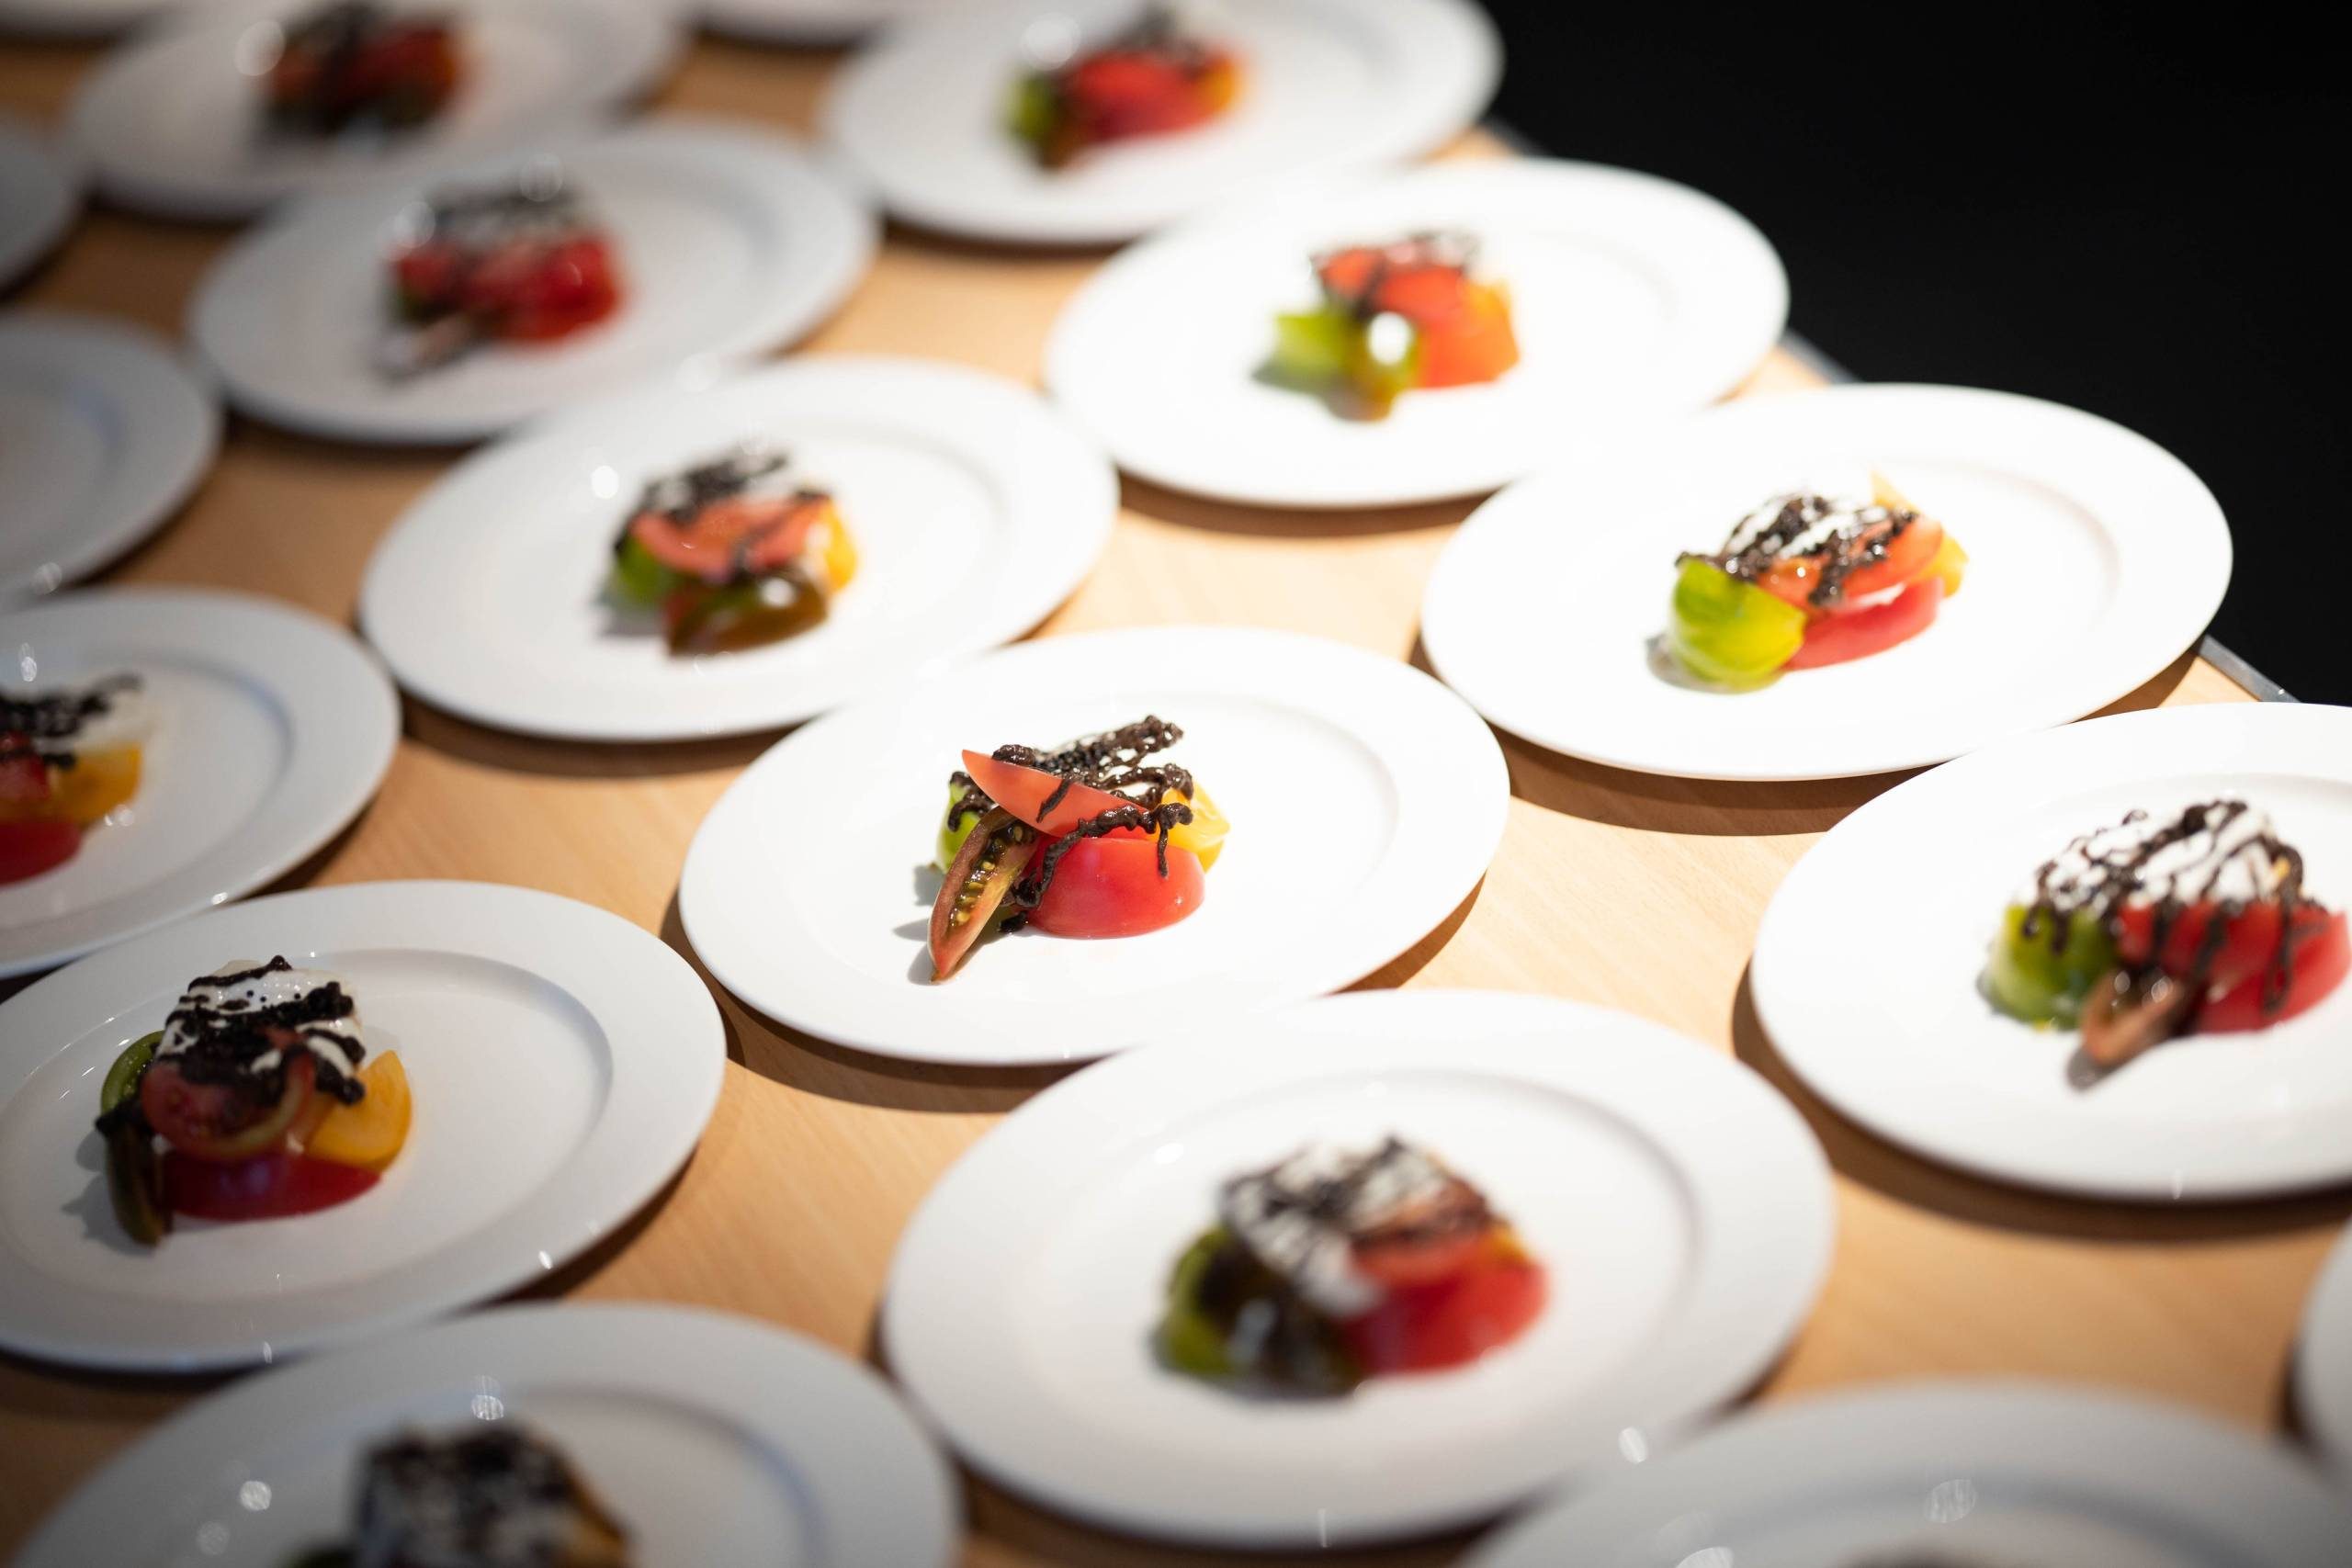 This image shows a selection of small plates with colourful canapes